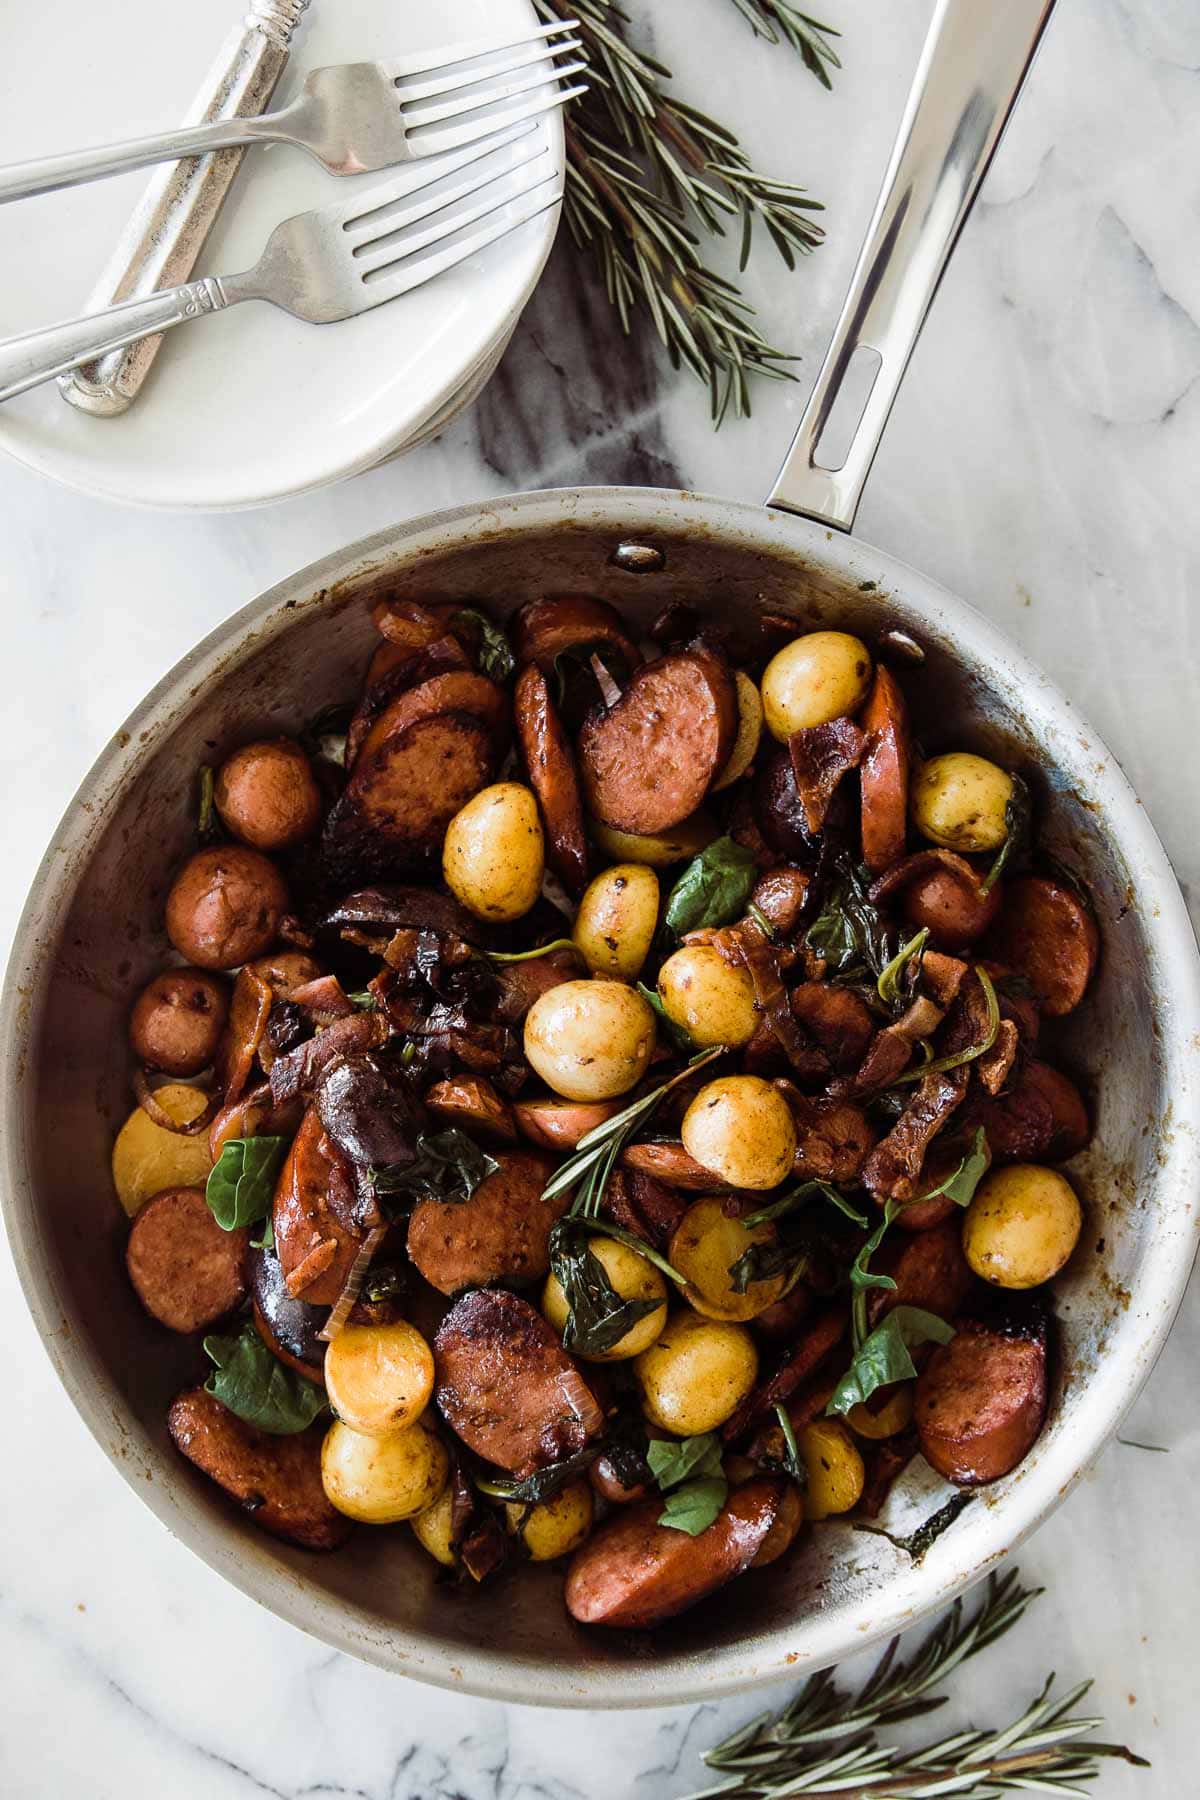 Potatoes and kielbasa recipe cooked and served up in a large skillet